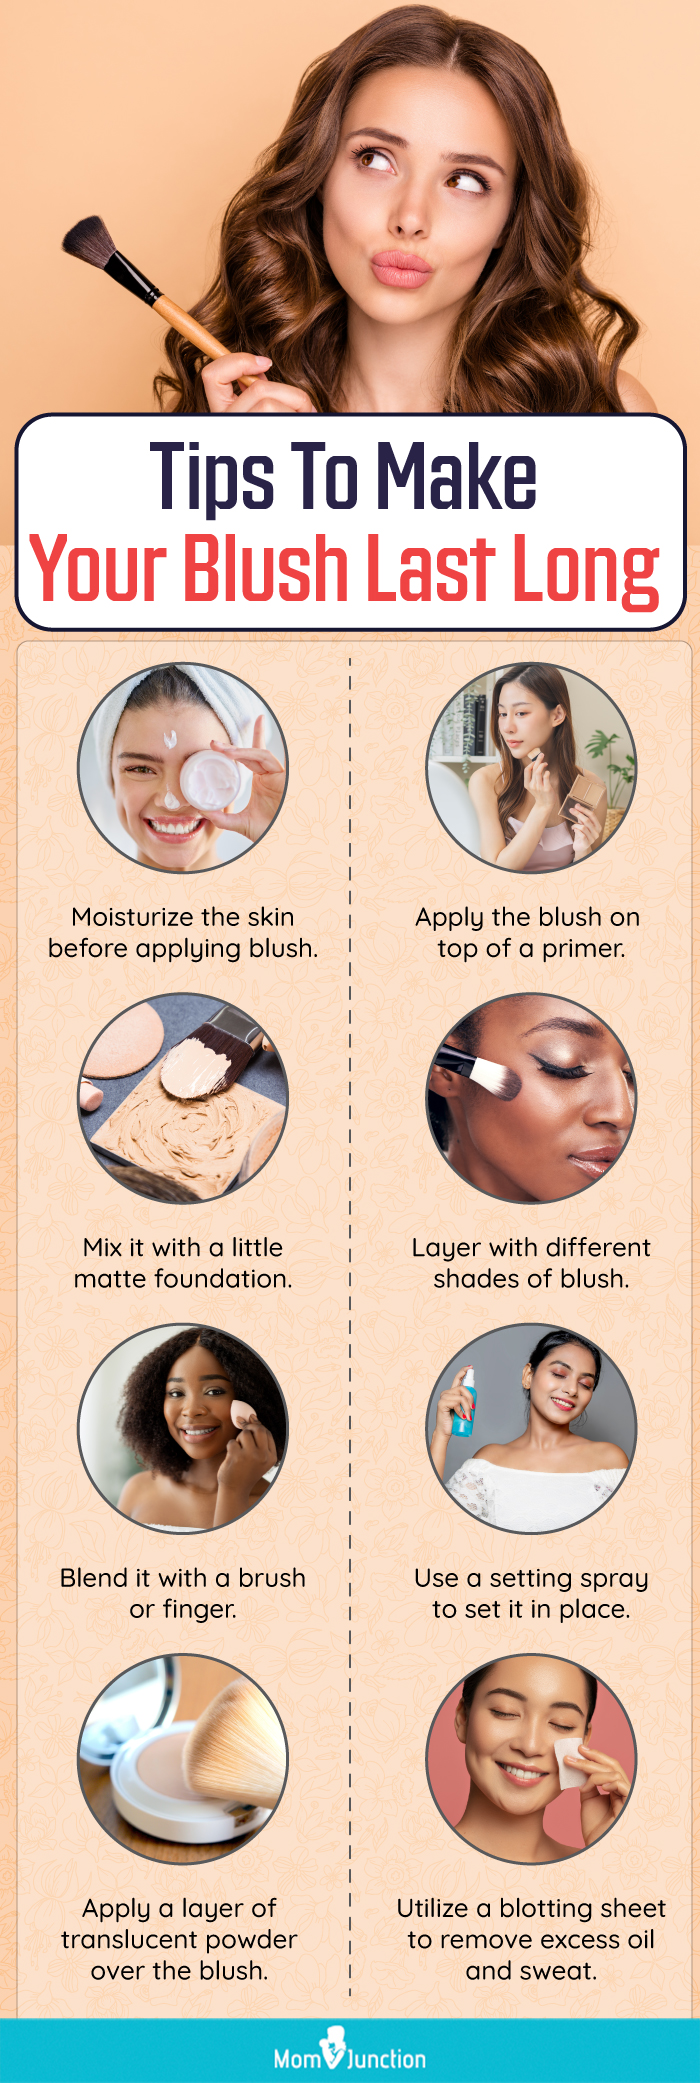 Tips To Make Your Blush Last Long (infographic)